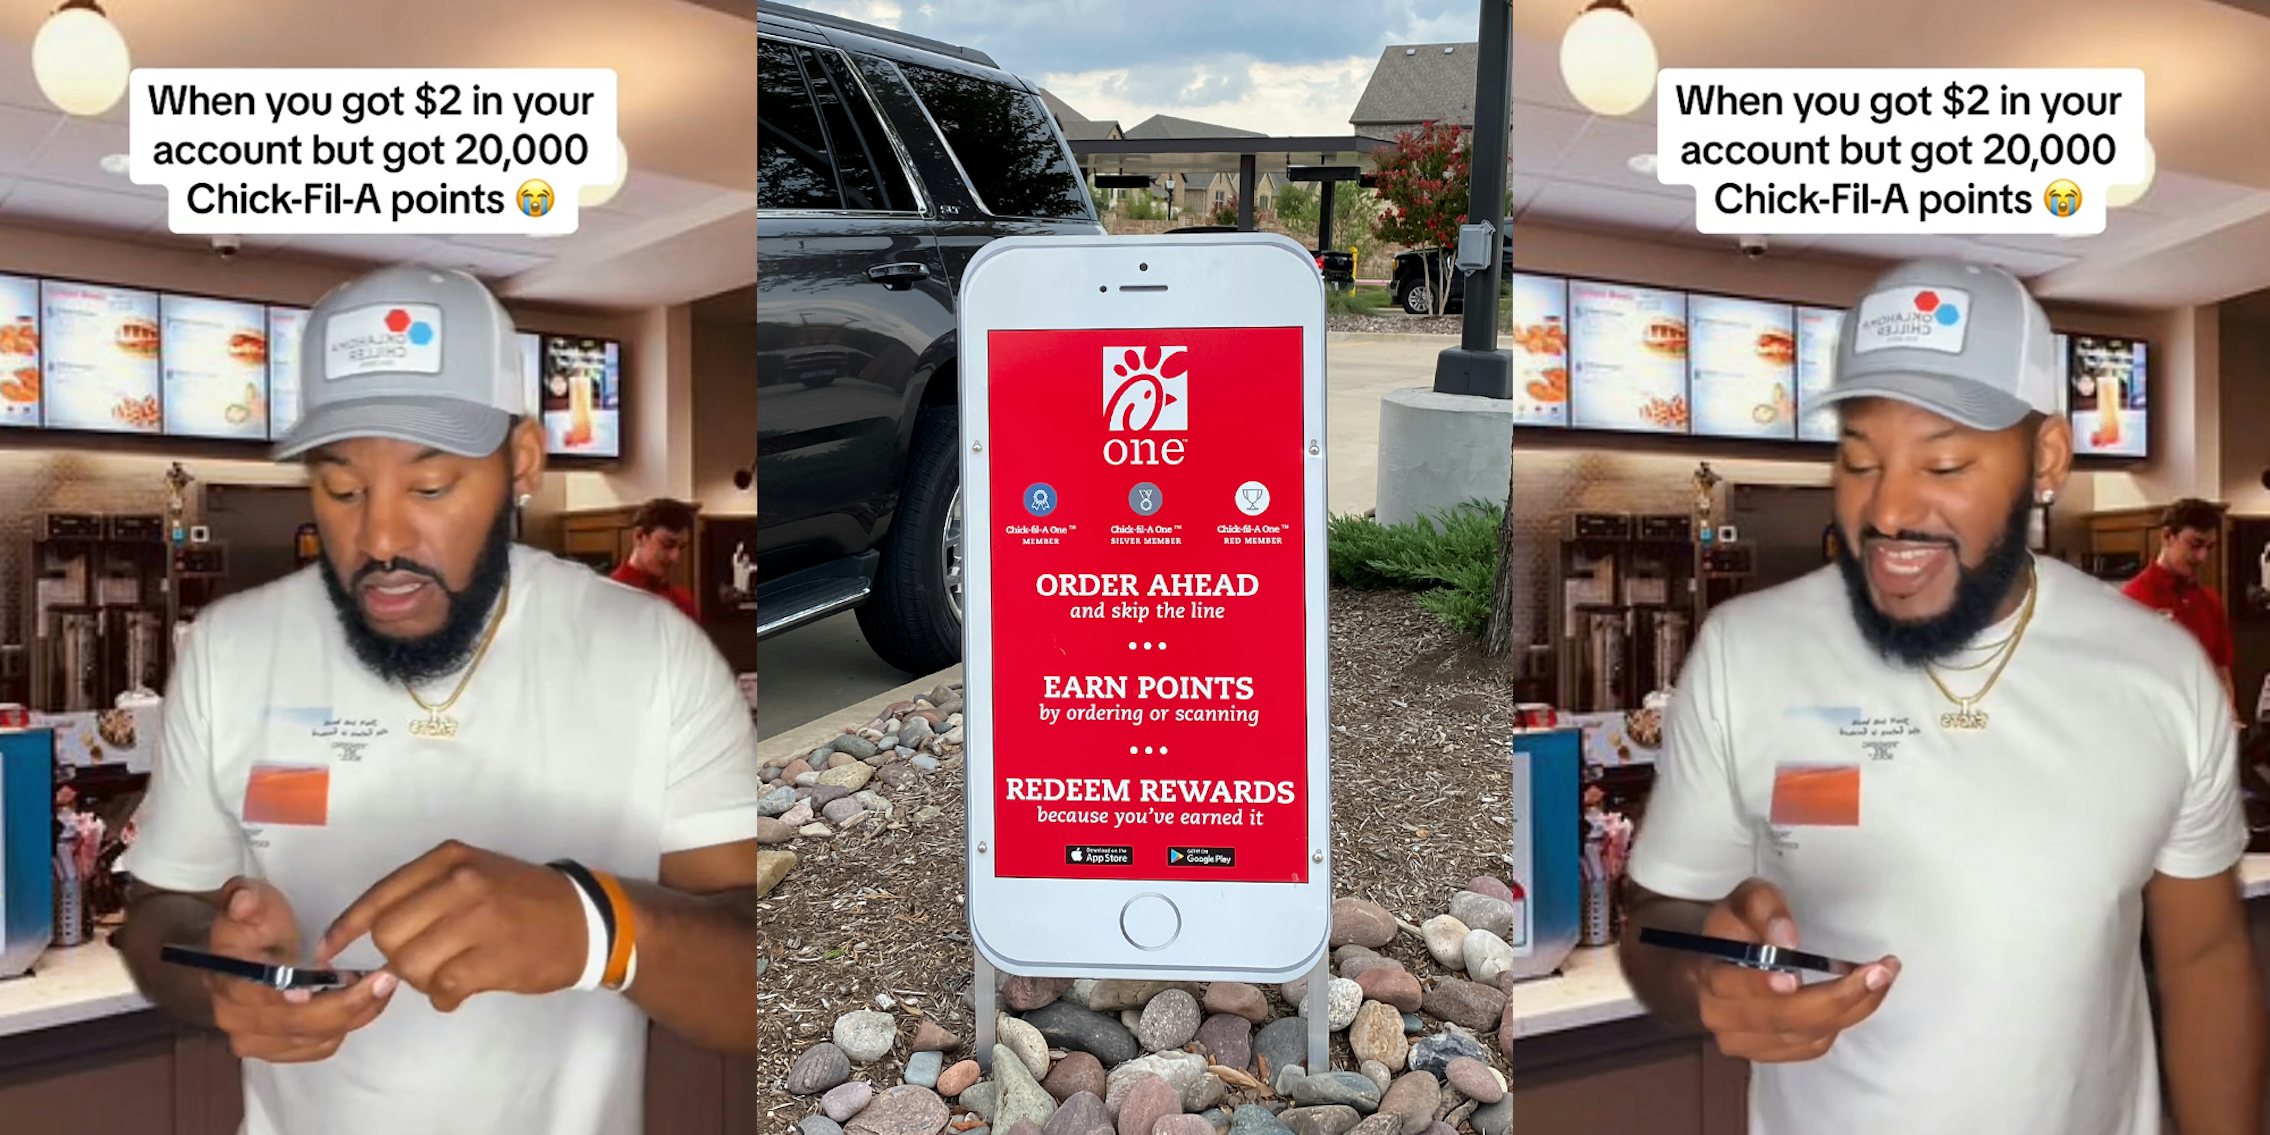 Chick-Fil-A customer greenscreen TikTok over interior of restaurant with caption 'When you got $2 in your bank account but got 20,000 Chick-Fil-A points' (l) Chick-Fil-A drive thru sign for ordering ahead and earning points (c) Chick-Fil-A customer greenscreen TikTok over interior of restaurant with caption 'When you got $2 in your bank account but got 20,000 Chick-Fil-A points' (r)